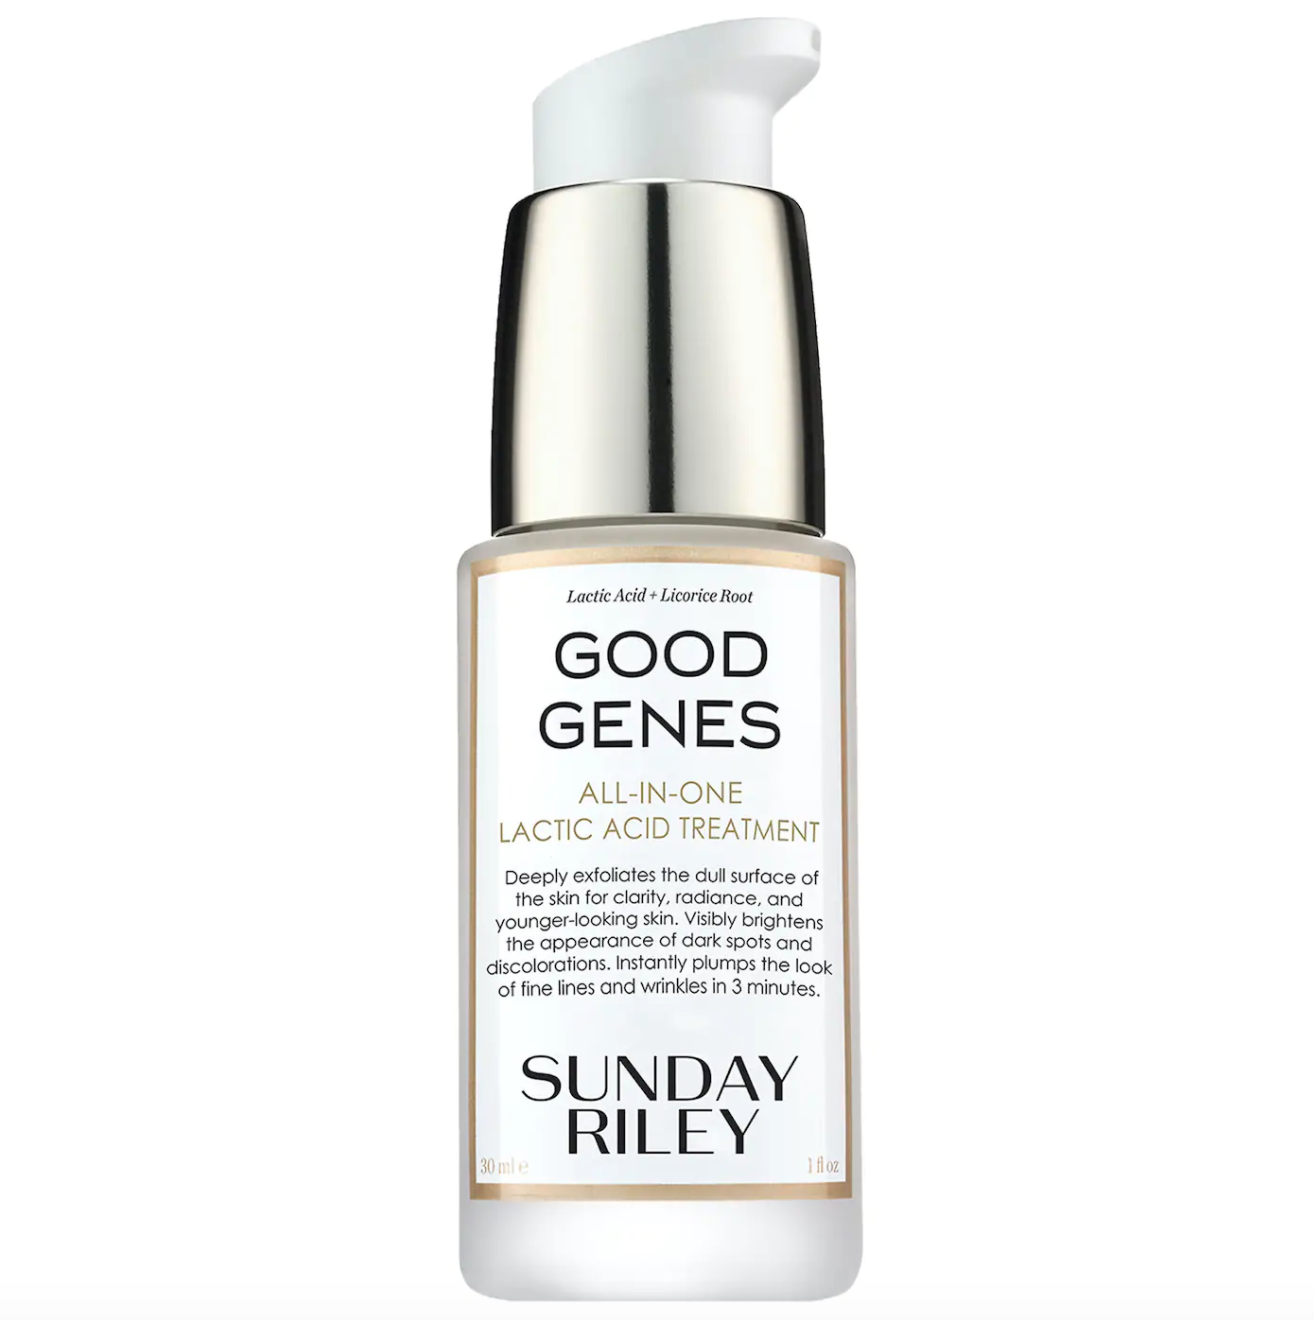 Sunday Riley Lighthearted New Sunscreen Review 2020